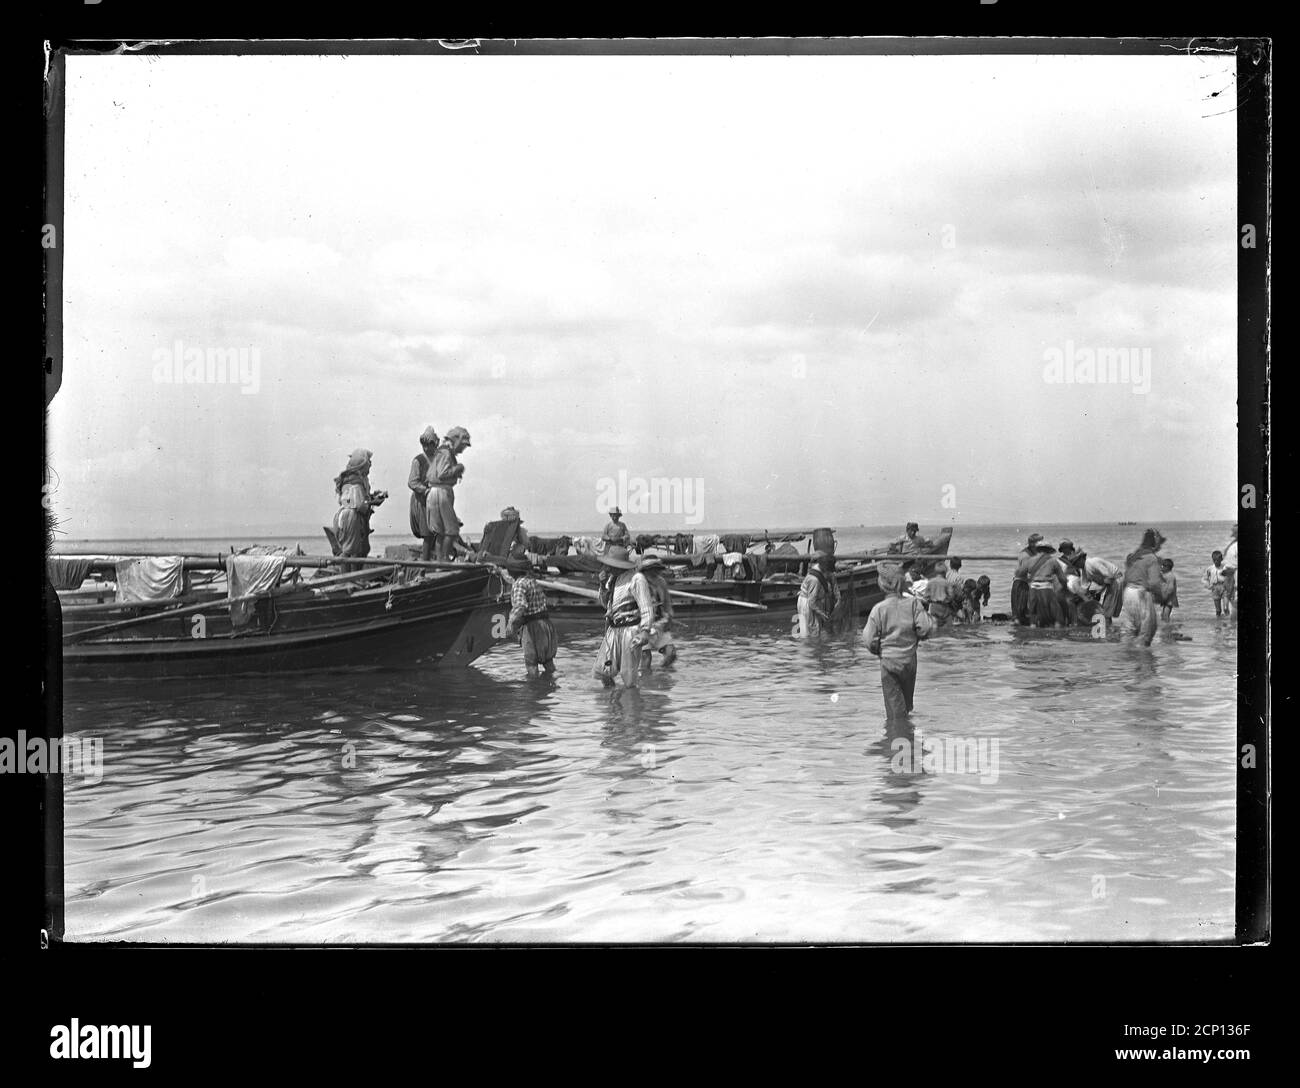 Turkish fishermen maintaining their equiment for the next fishing trip. Turkey, presumably near Izmir (Smyrna). Photograph on dry glass plate from the Herry W. Schaefer collection, around 1913. Stock Photo